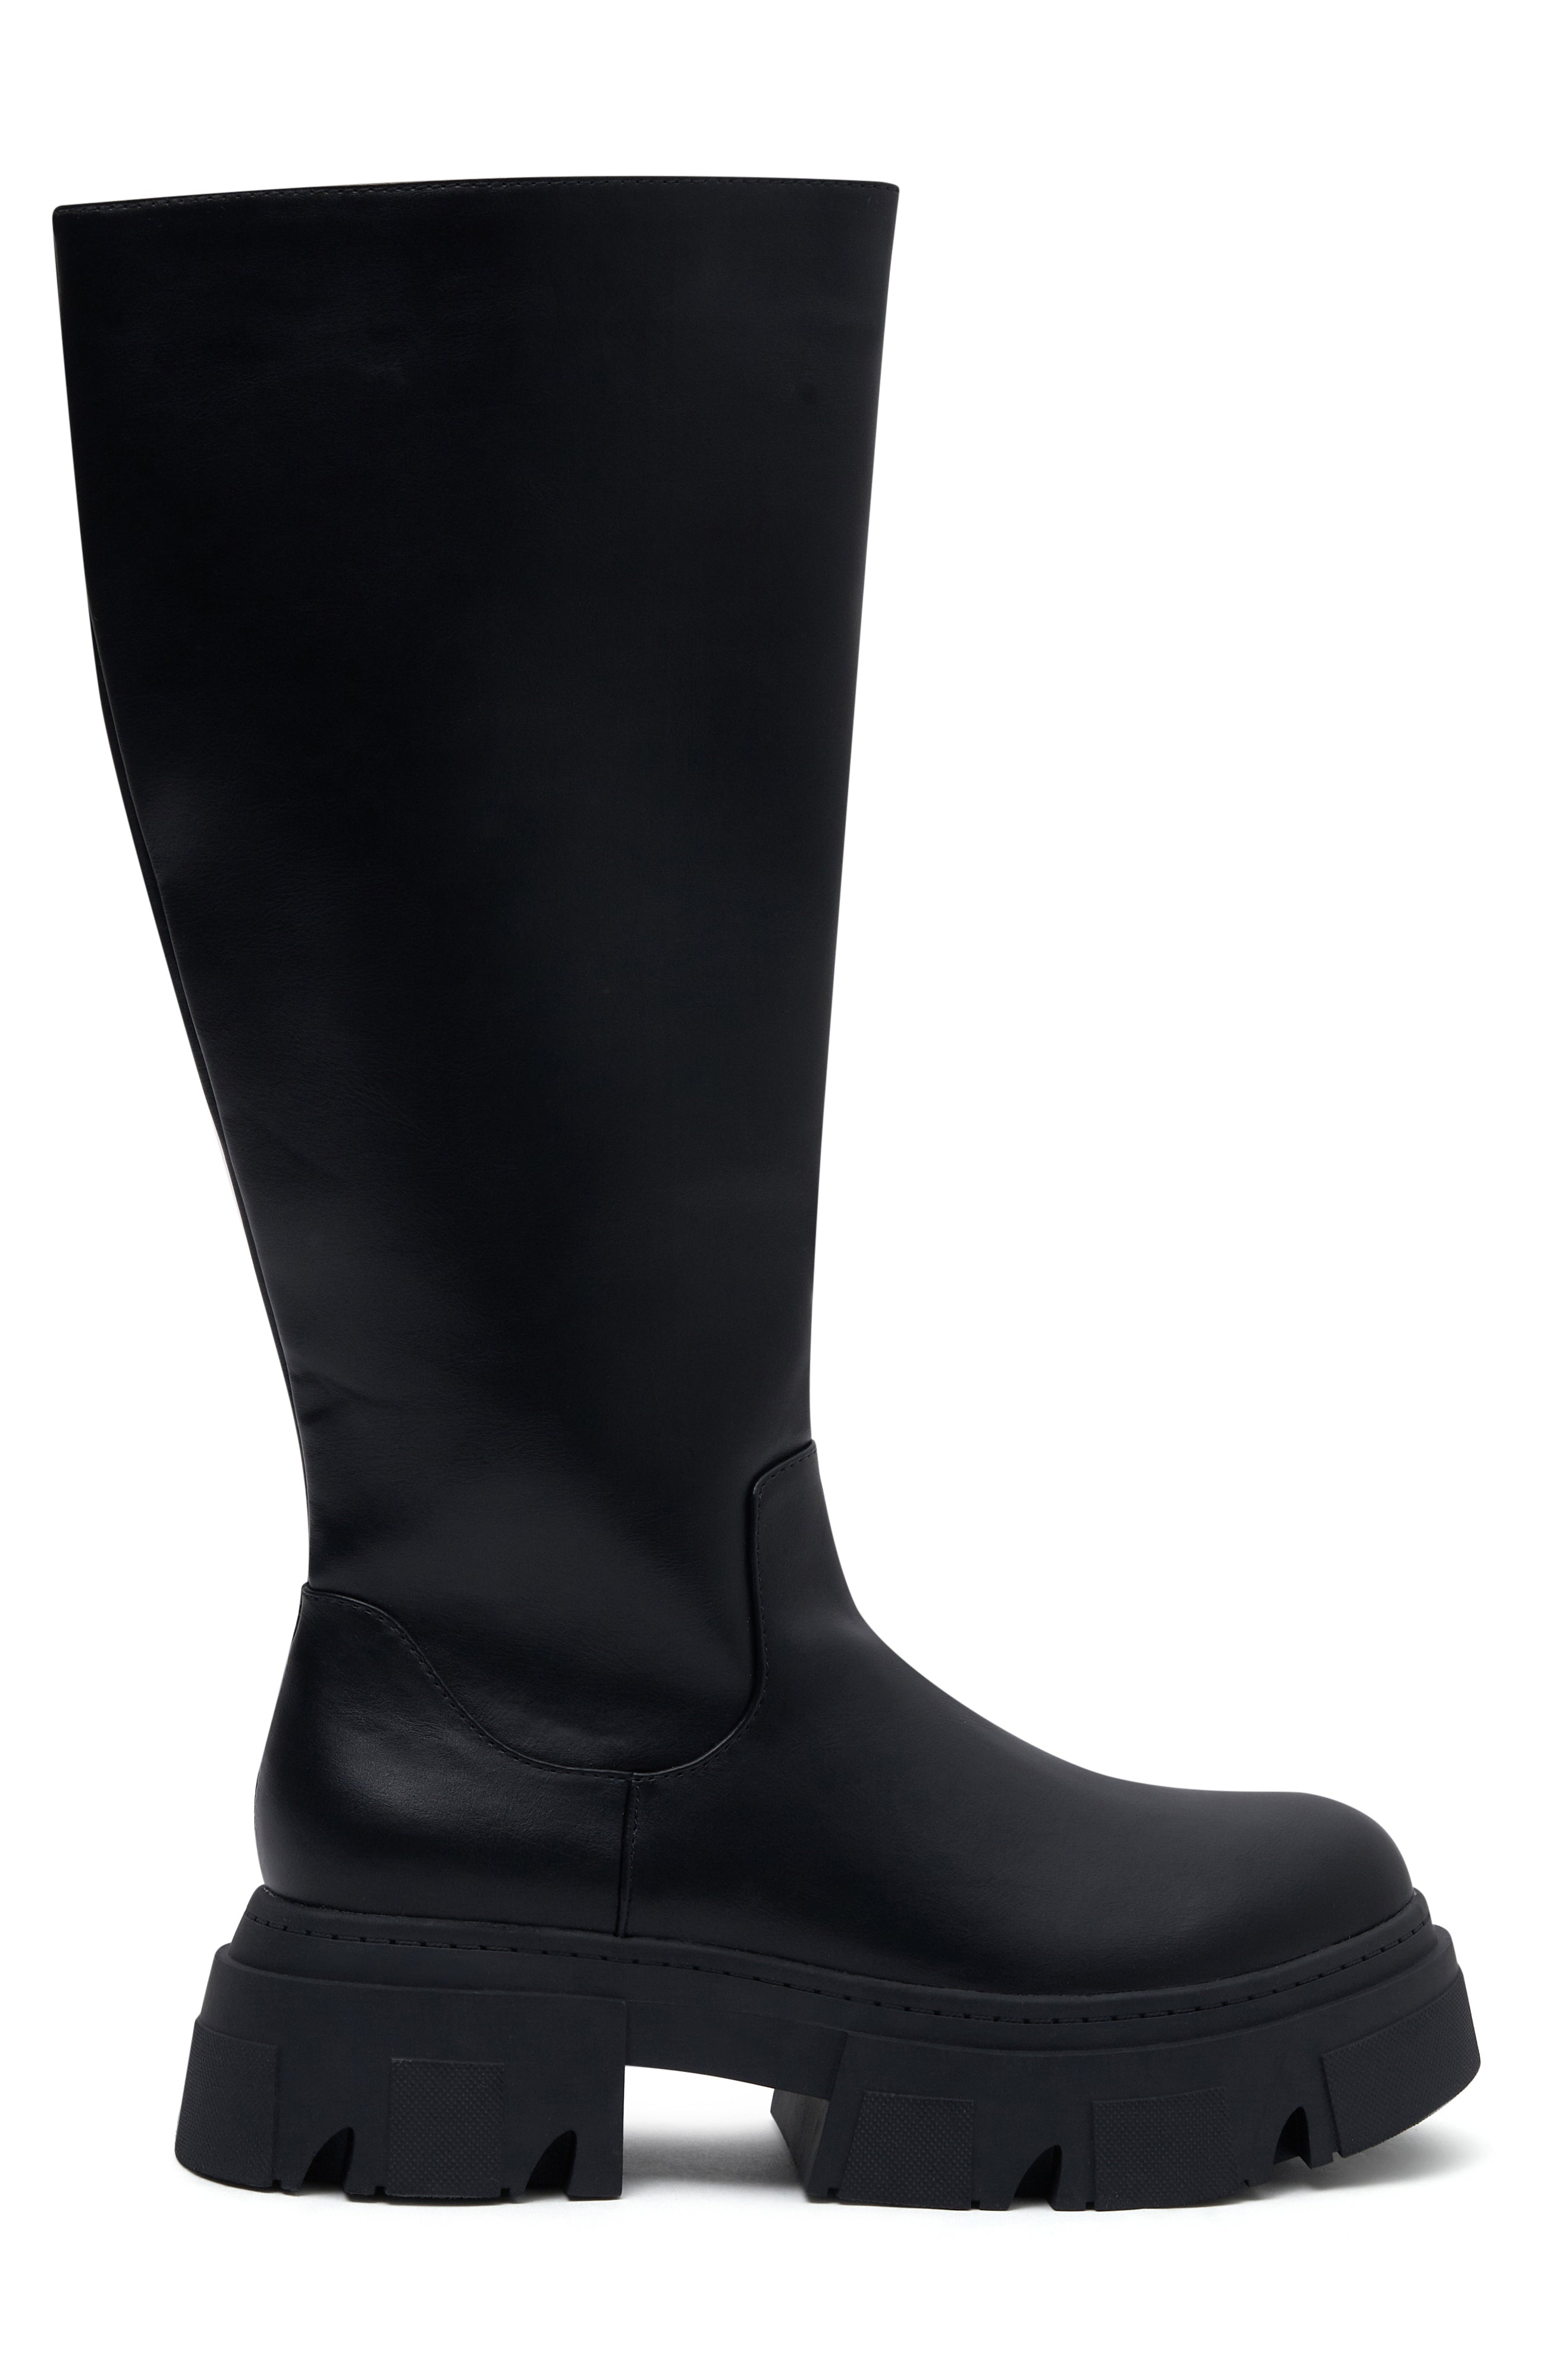 Jax Knee High Boots Black - White Fox Boutique Shoes - 5 - Shop with Afterpay